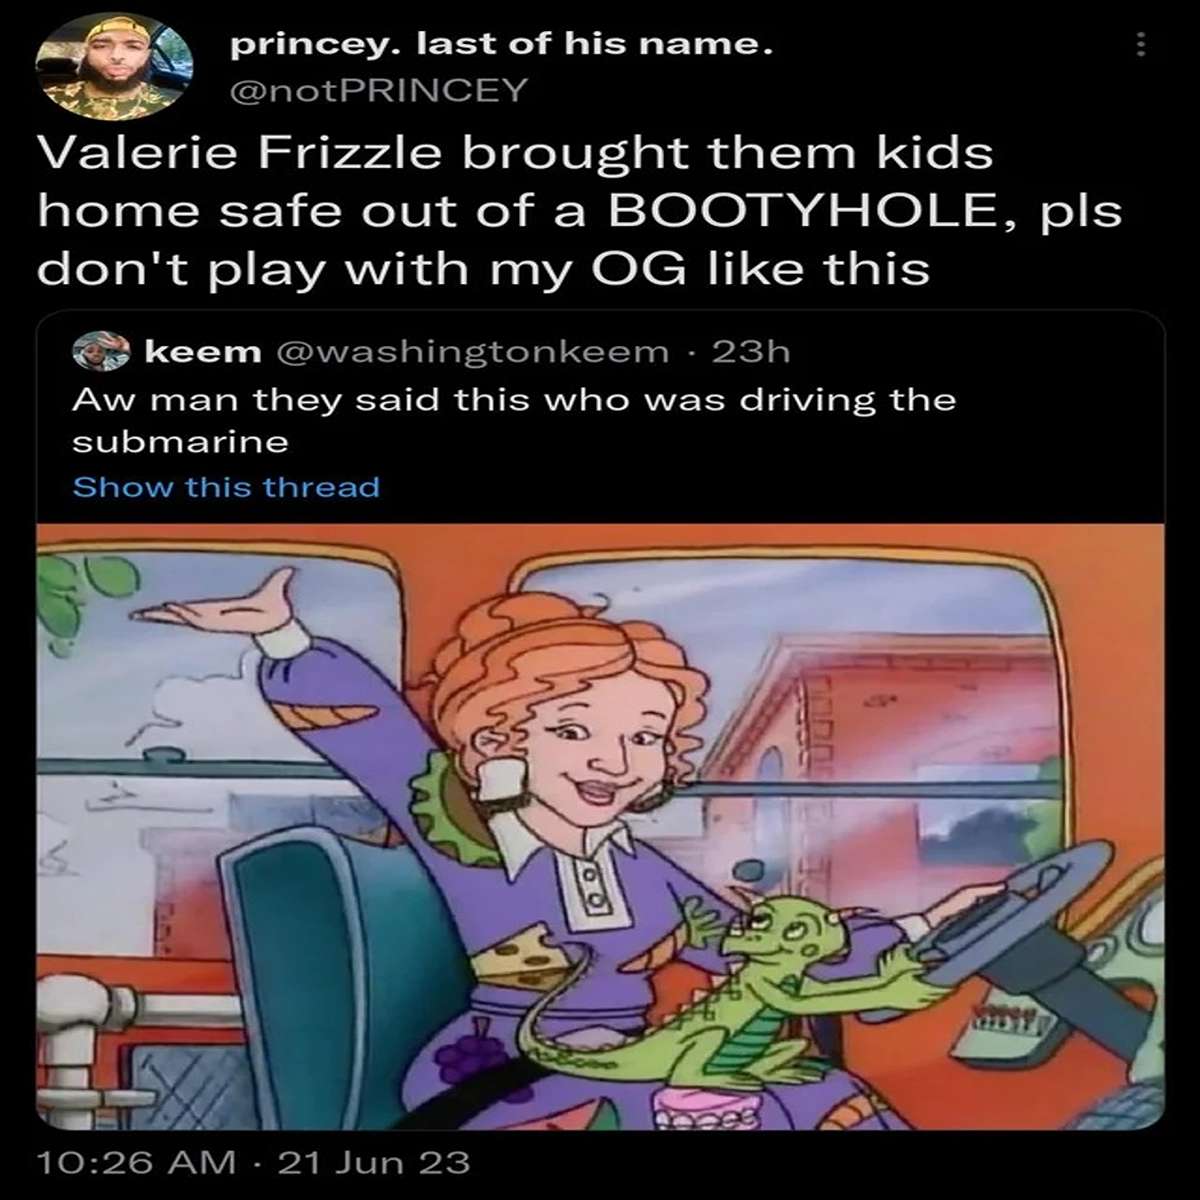 funny tweets and memes - cartoon - princey. last of his name. Princey Valerie Frizzle brought them kids home safe out of a Bootyhole, pls don't play with my Og this keem 23h Aw man they said this who was driving the submarine Show this thread 21 Jun 23 Yo